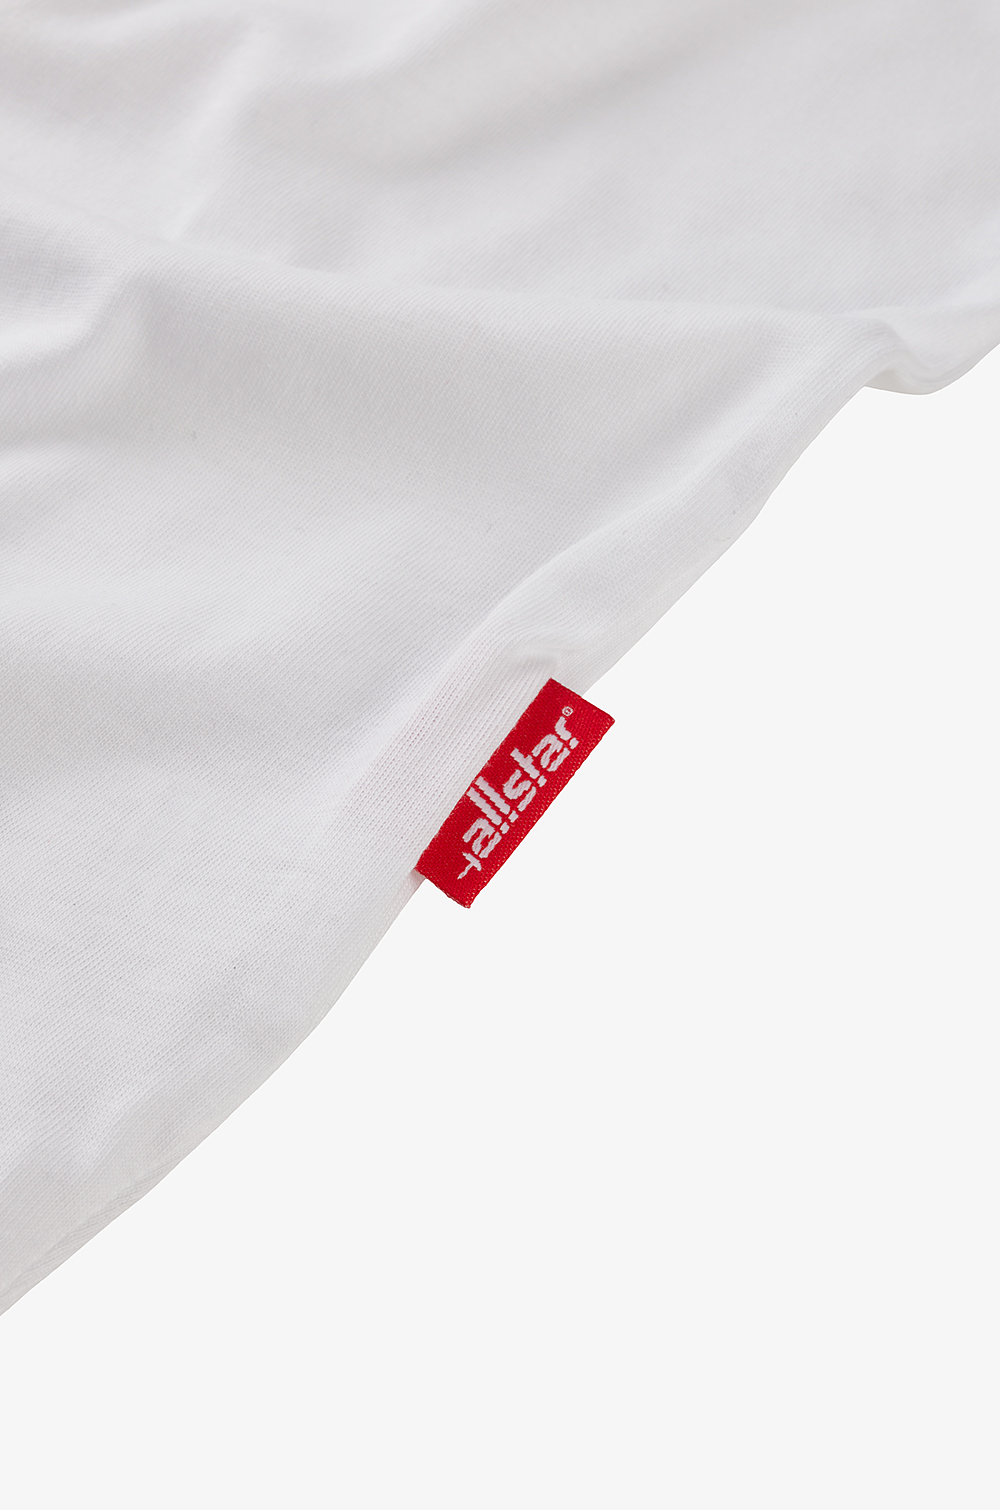 Flèche Reloaded 2.0 T-Shirt (white/red)